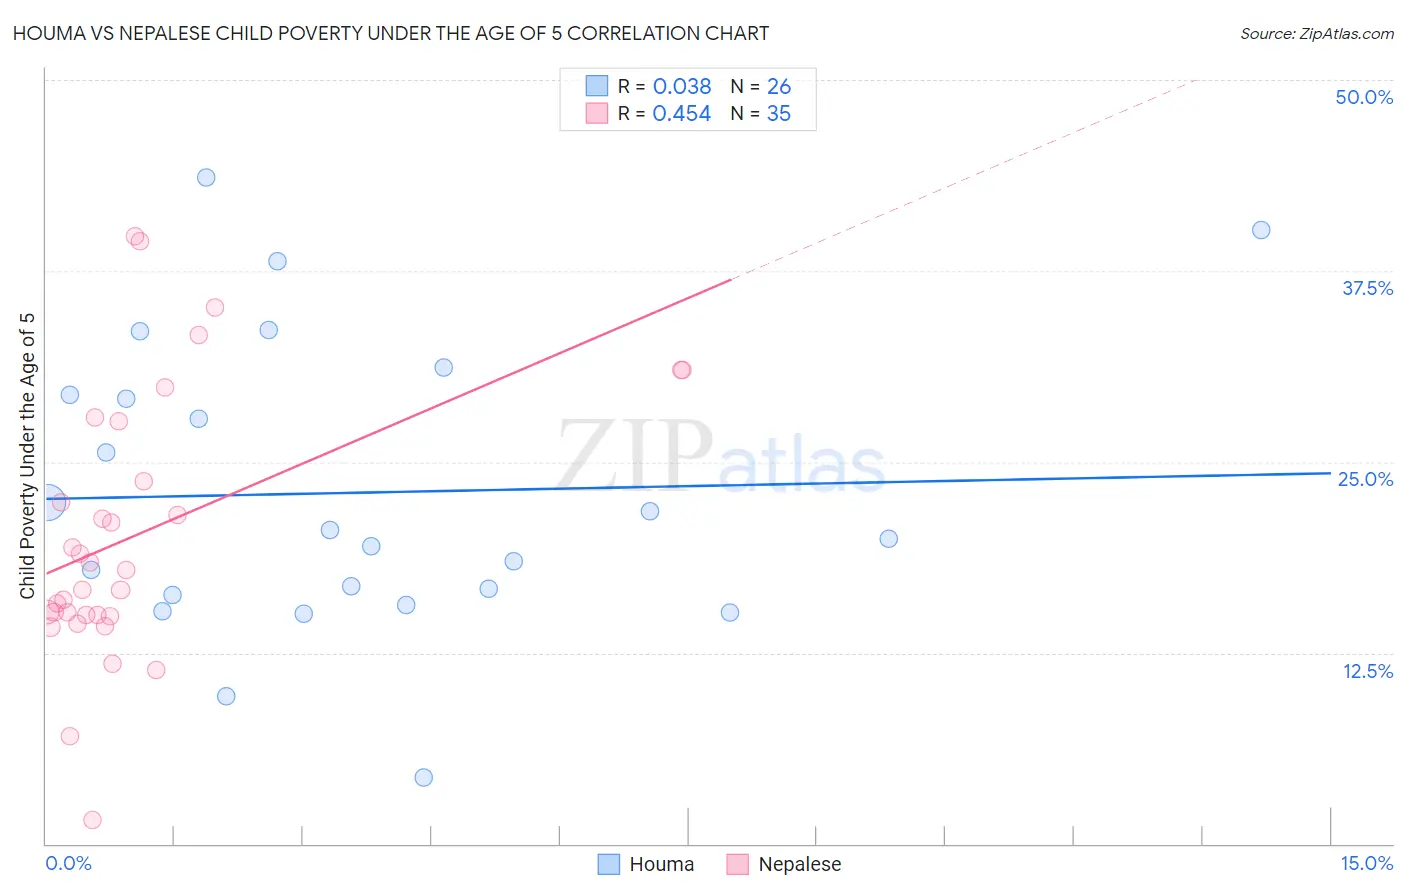 Houma vs Nepalese Child Poverty Under the Age of 5